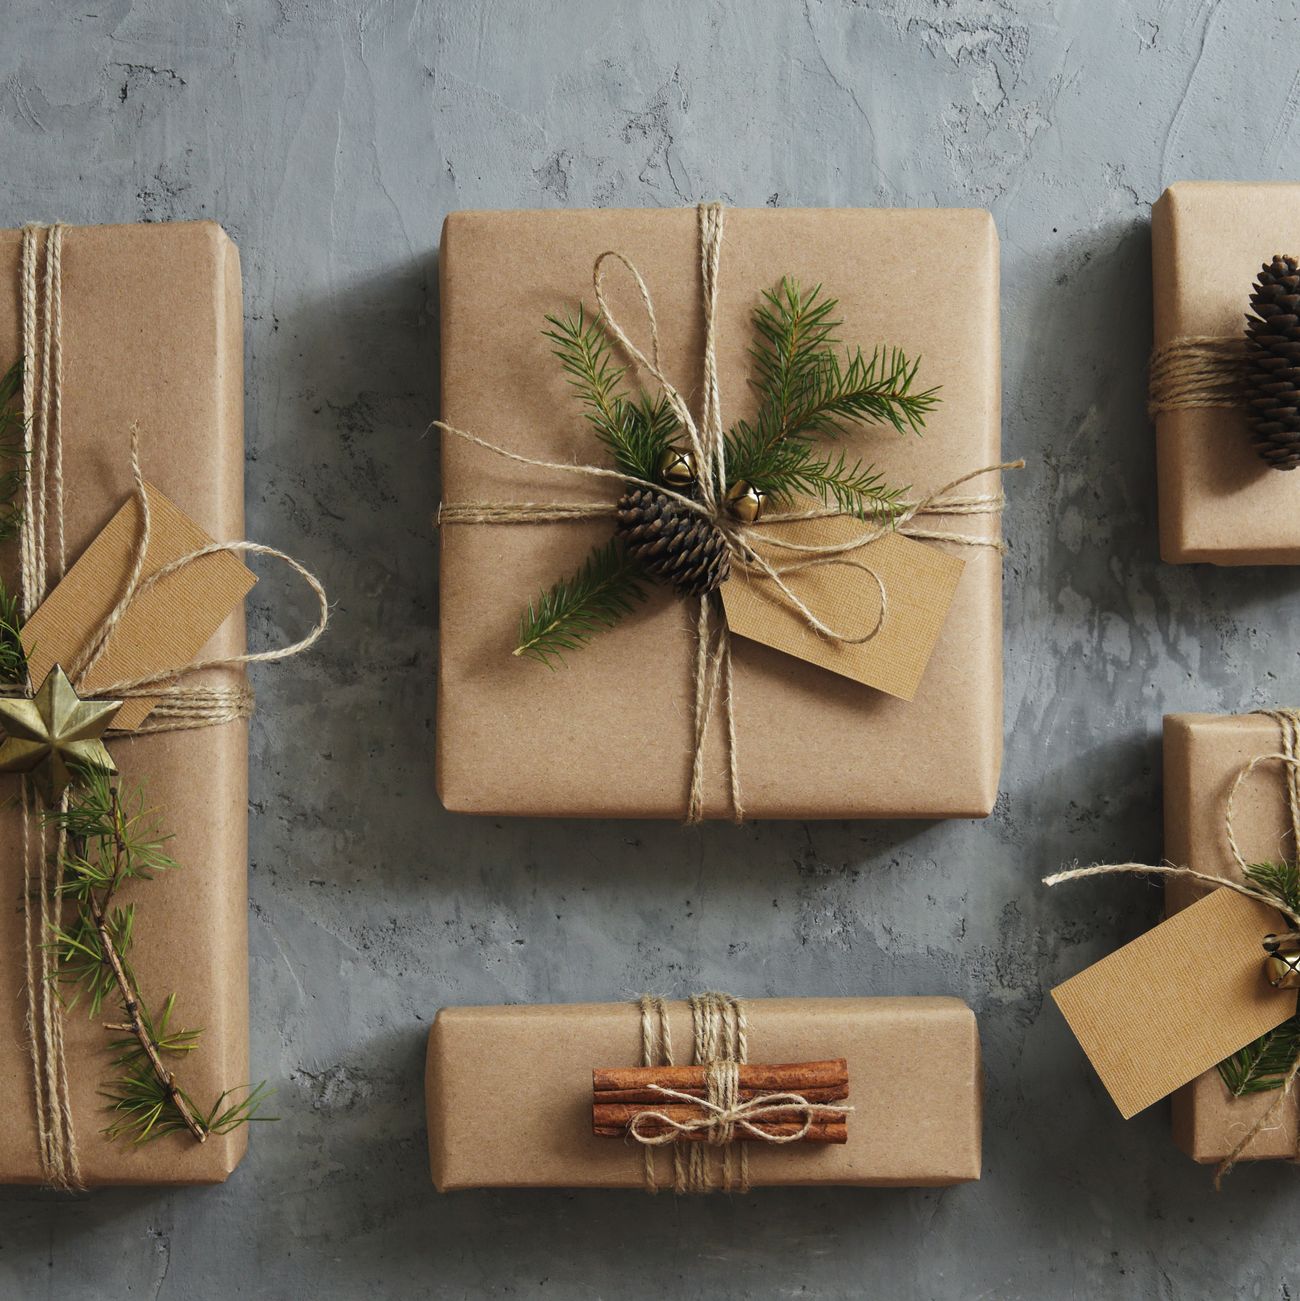 creative gift wrapping techniques